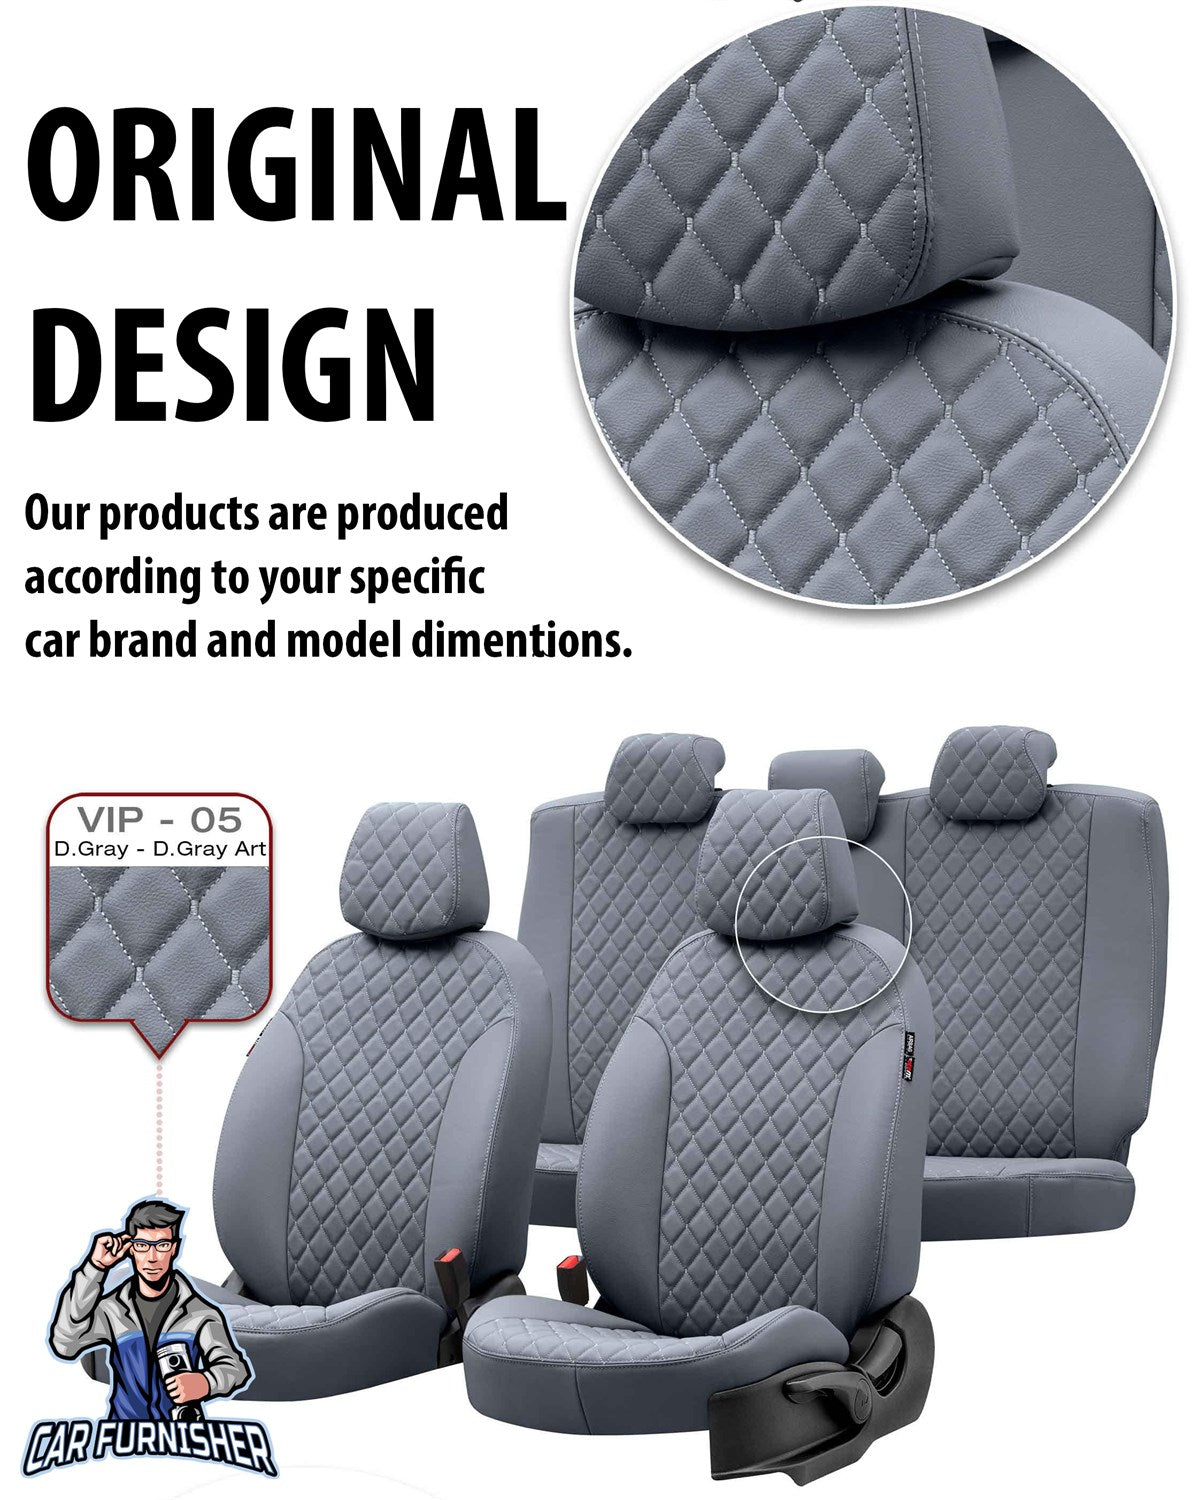 Fiat Stilo Seat Covers Madrid Leather Design Smoked Leather